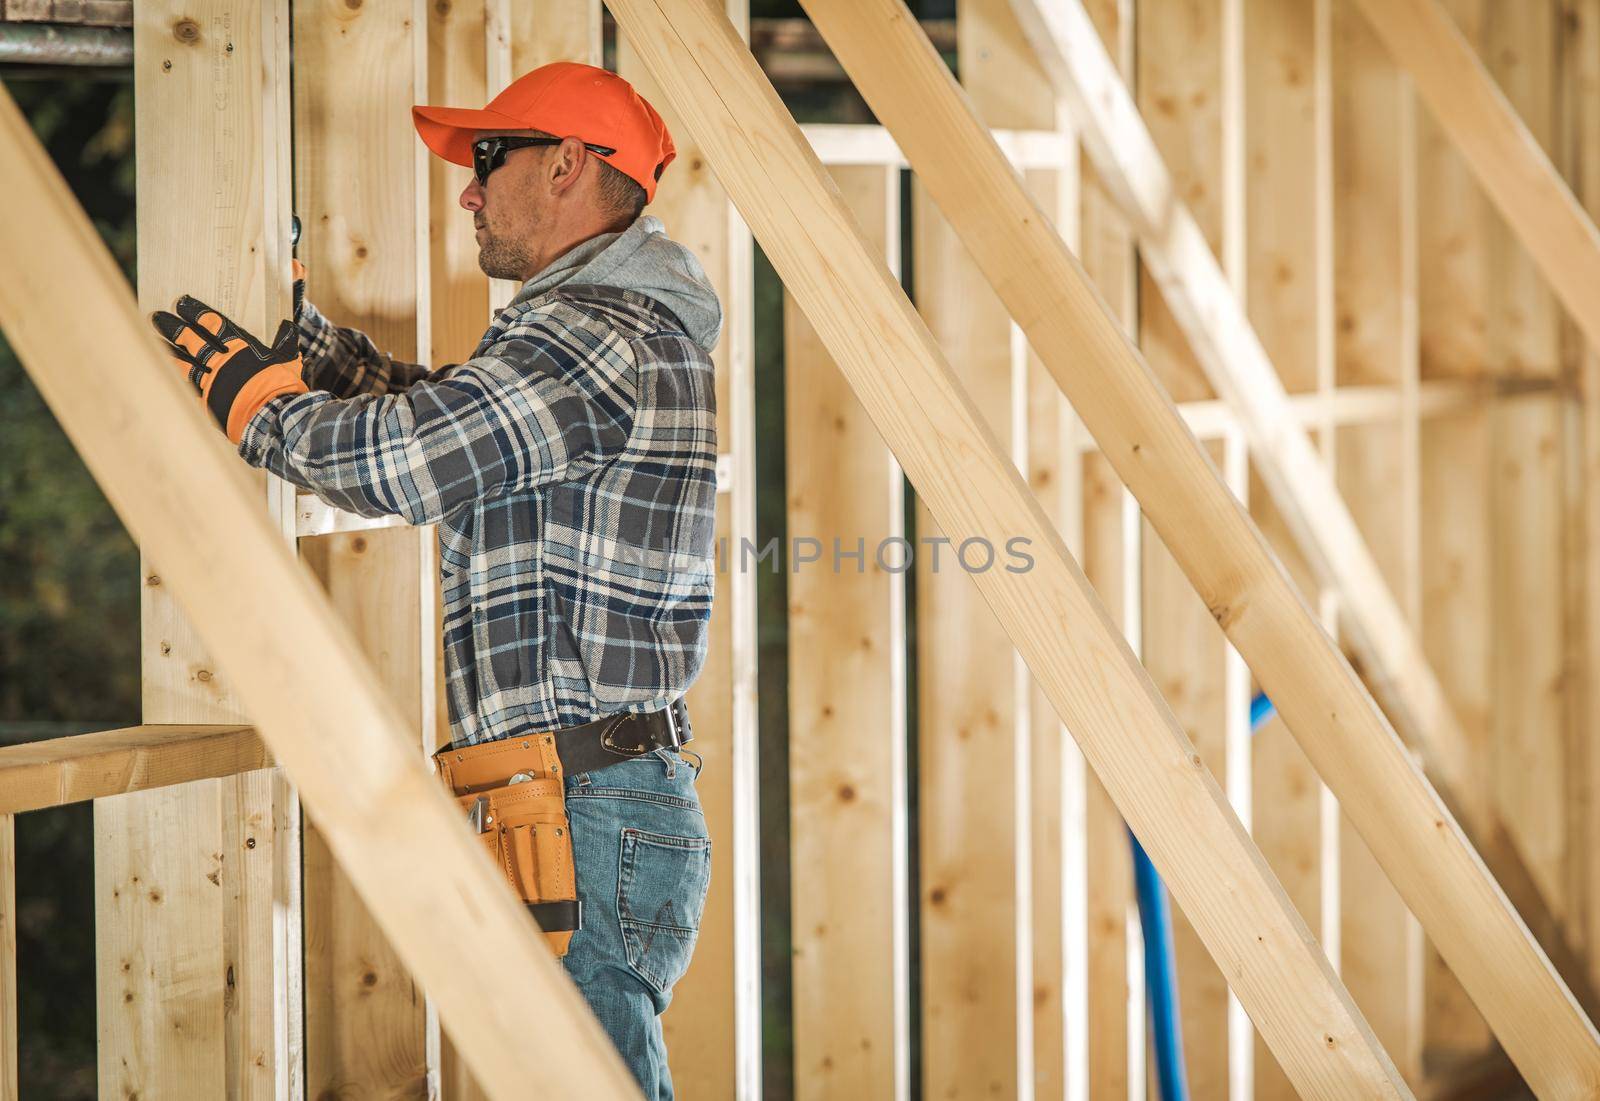 Caucasian Contractor Worker in His 30s with Drill Driver Attaching Wooden Frame Elements. Industrial Theme. Wood House Frame Construction